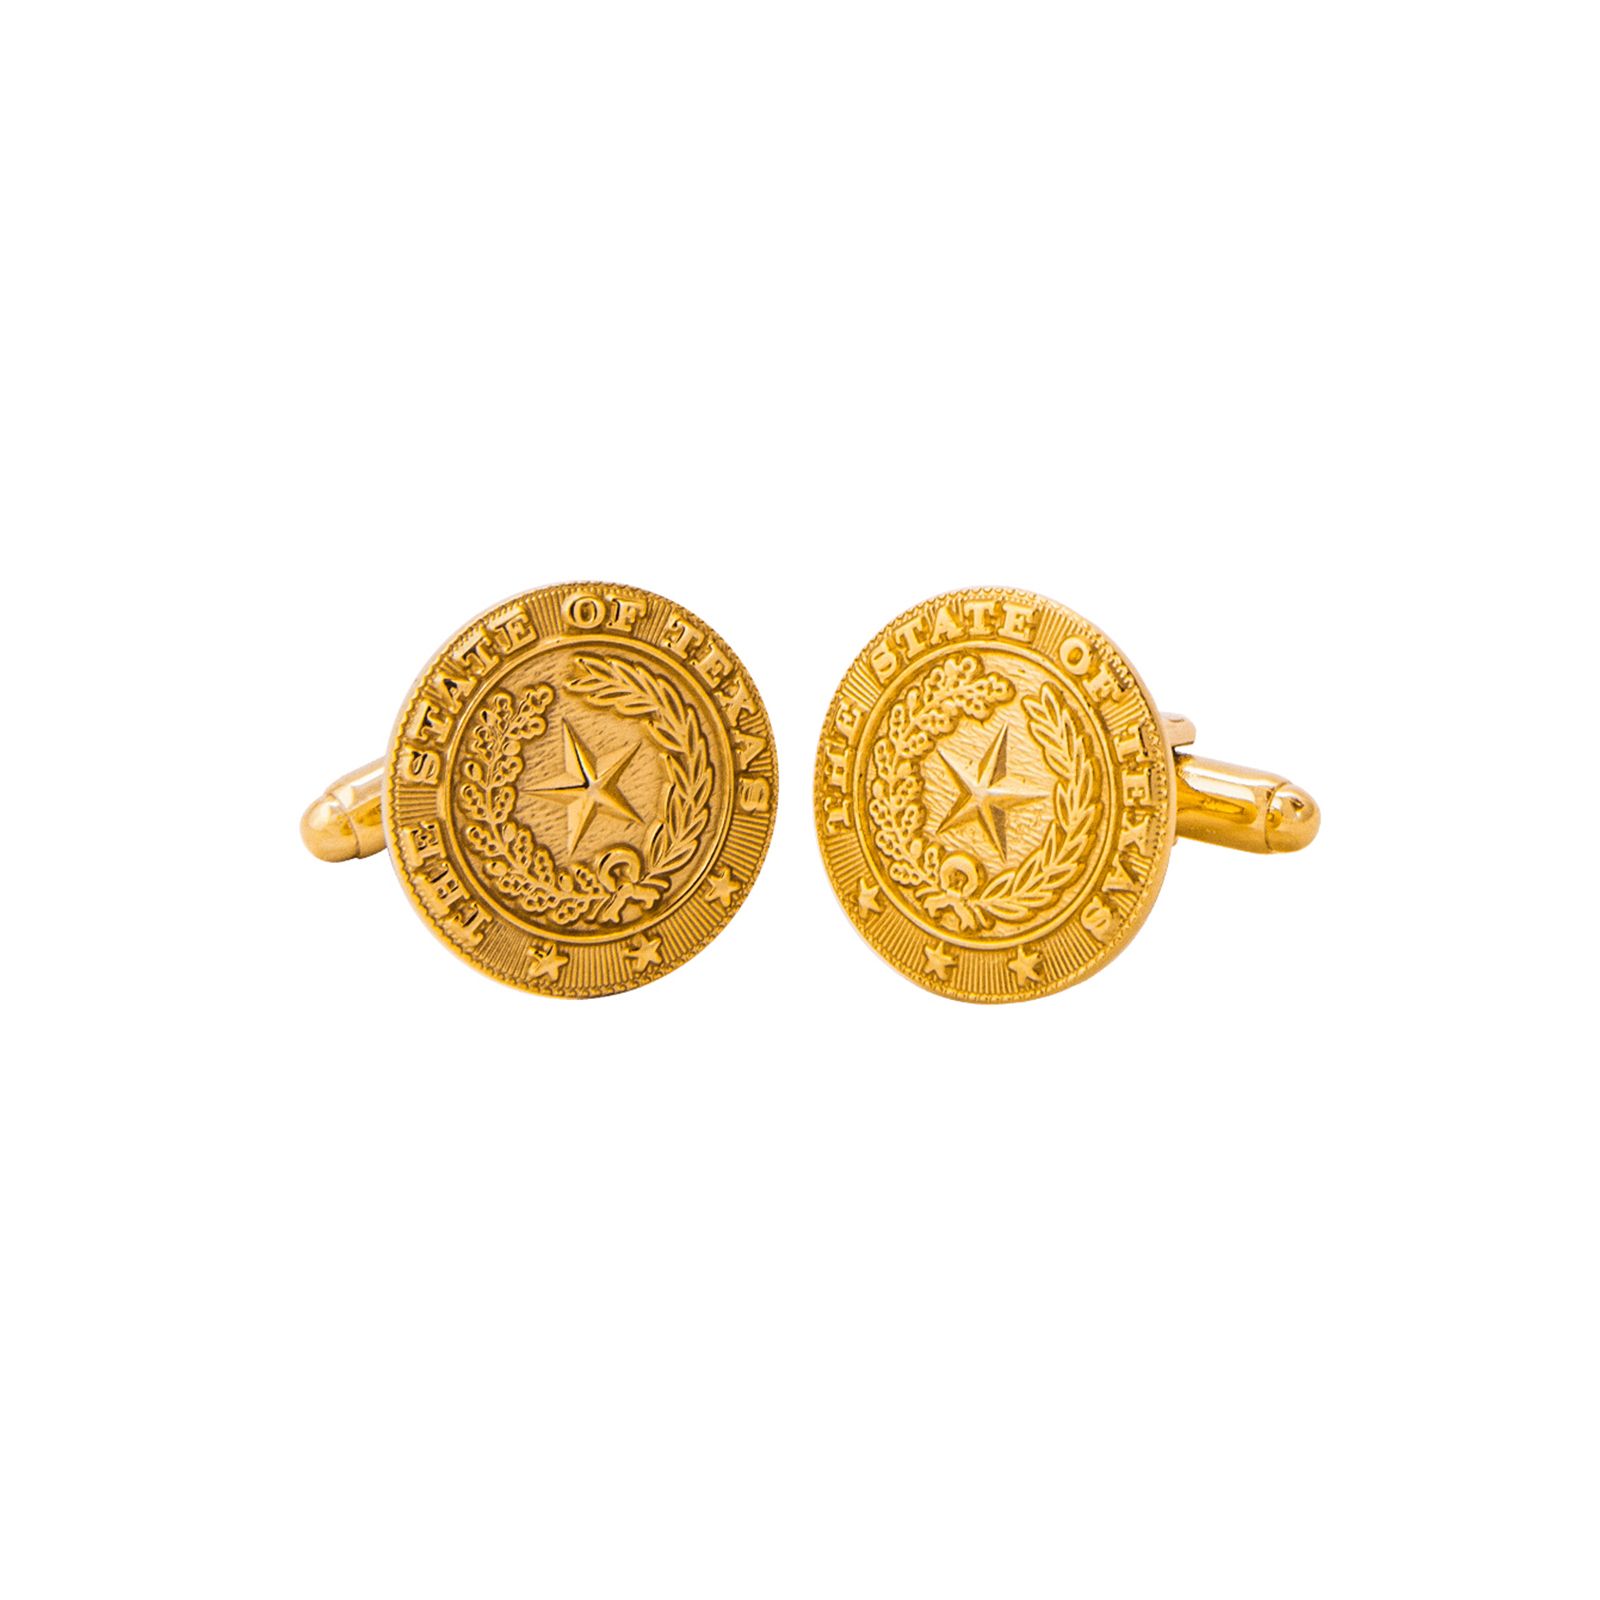 Texas State Seal Gold-Plated Cuff Links